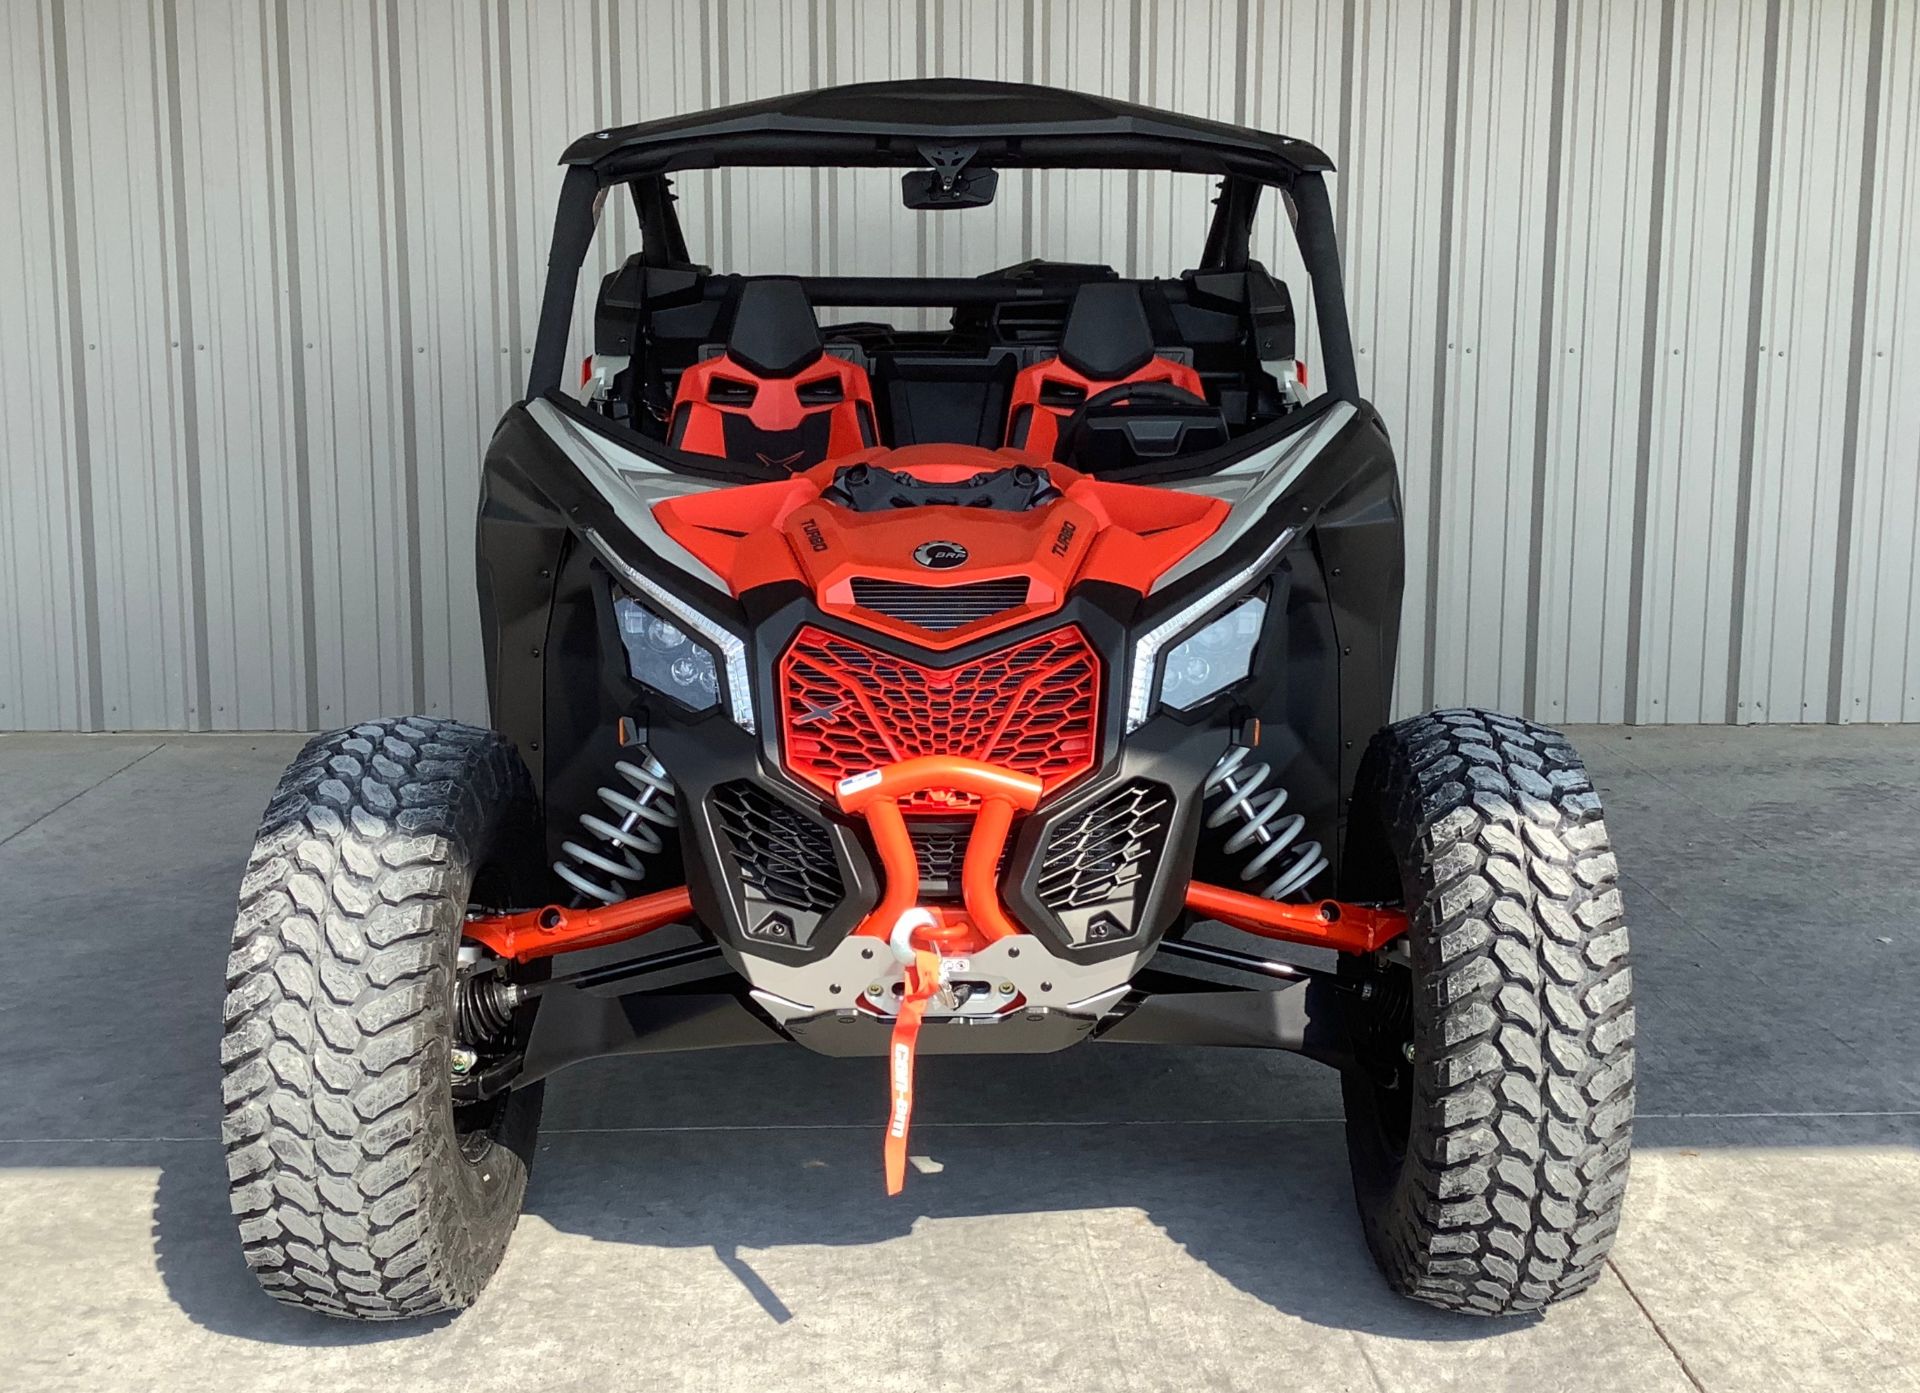 2021 Can-Am Maverick X3 X RC Turbo in Gainesville, Texas - Photo 4